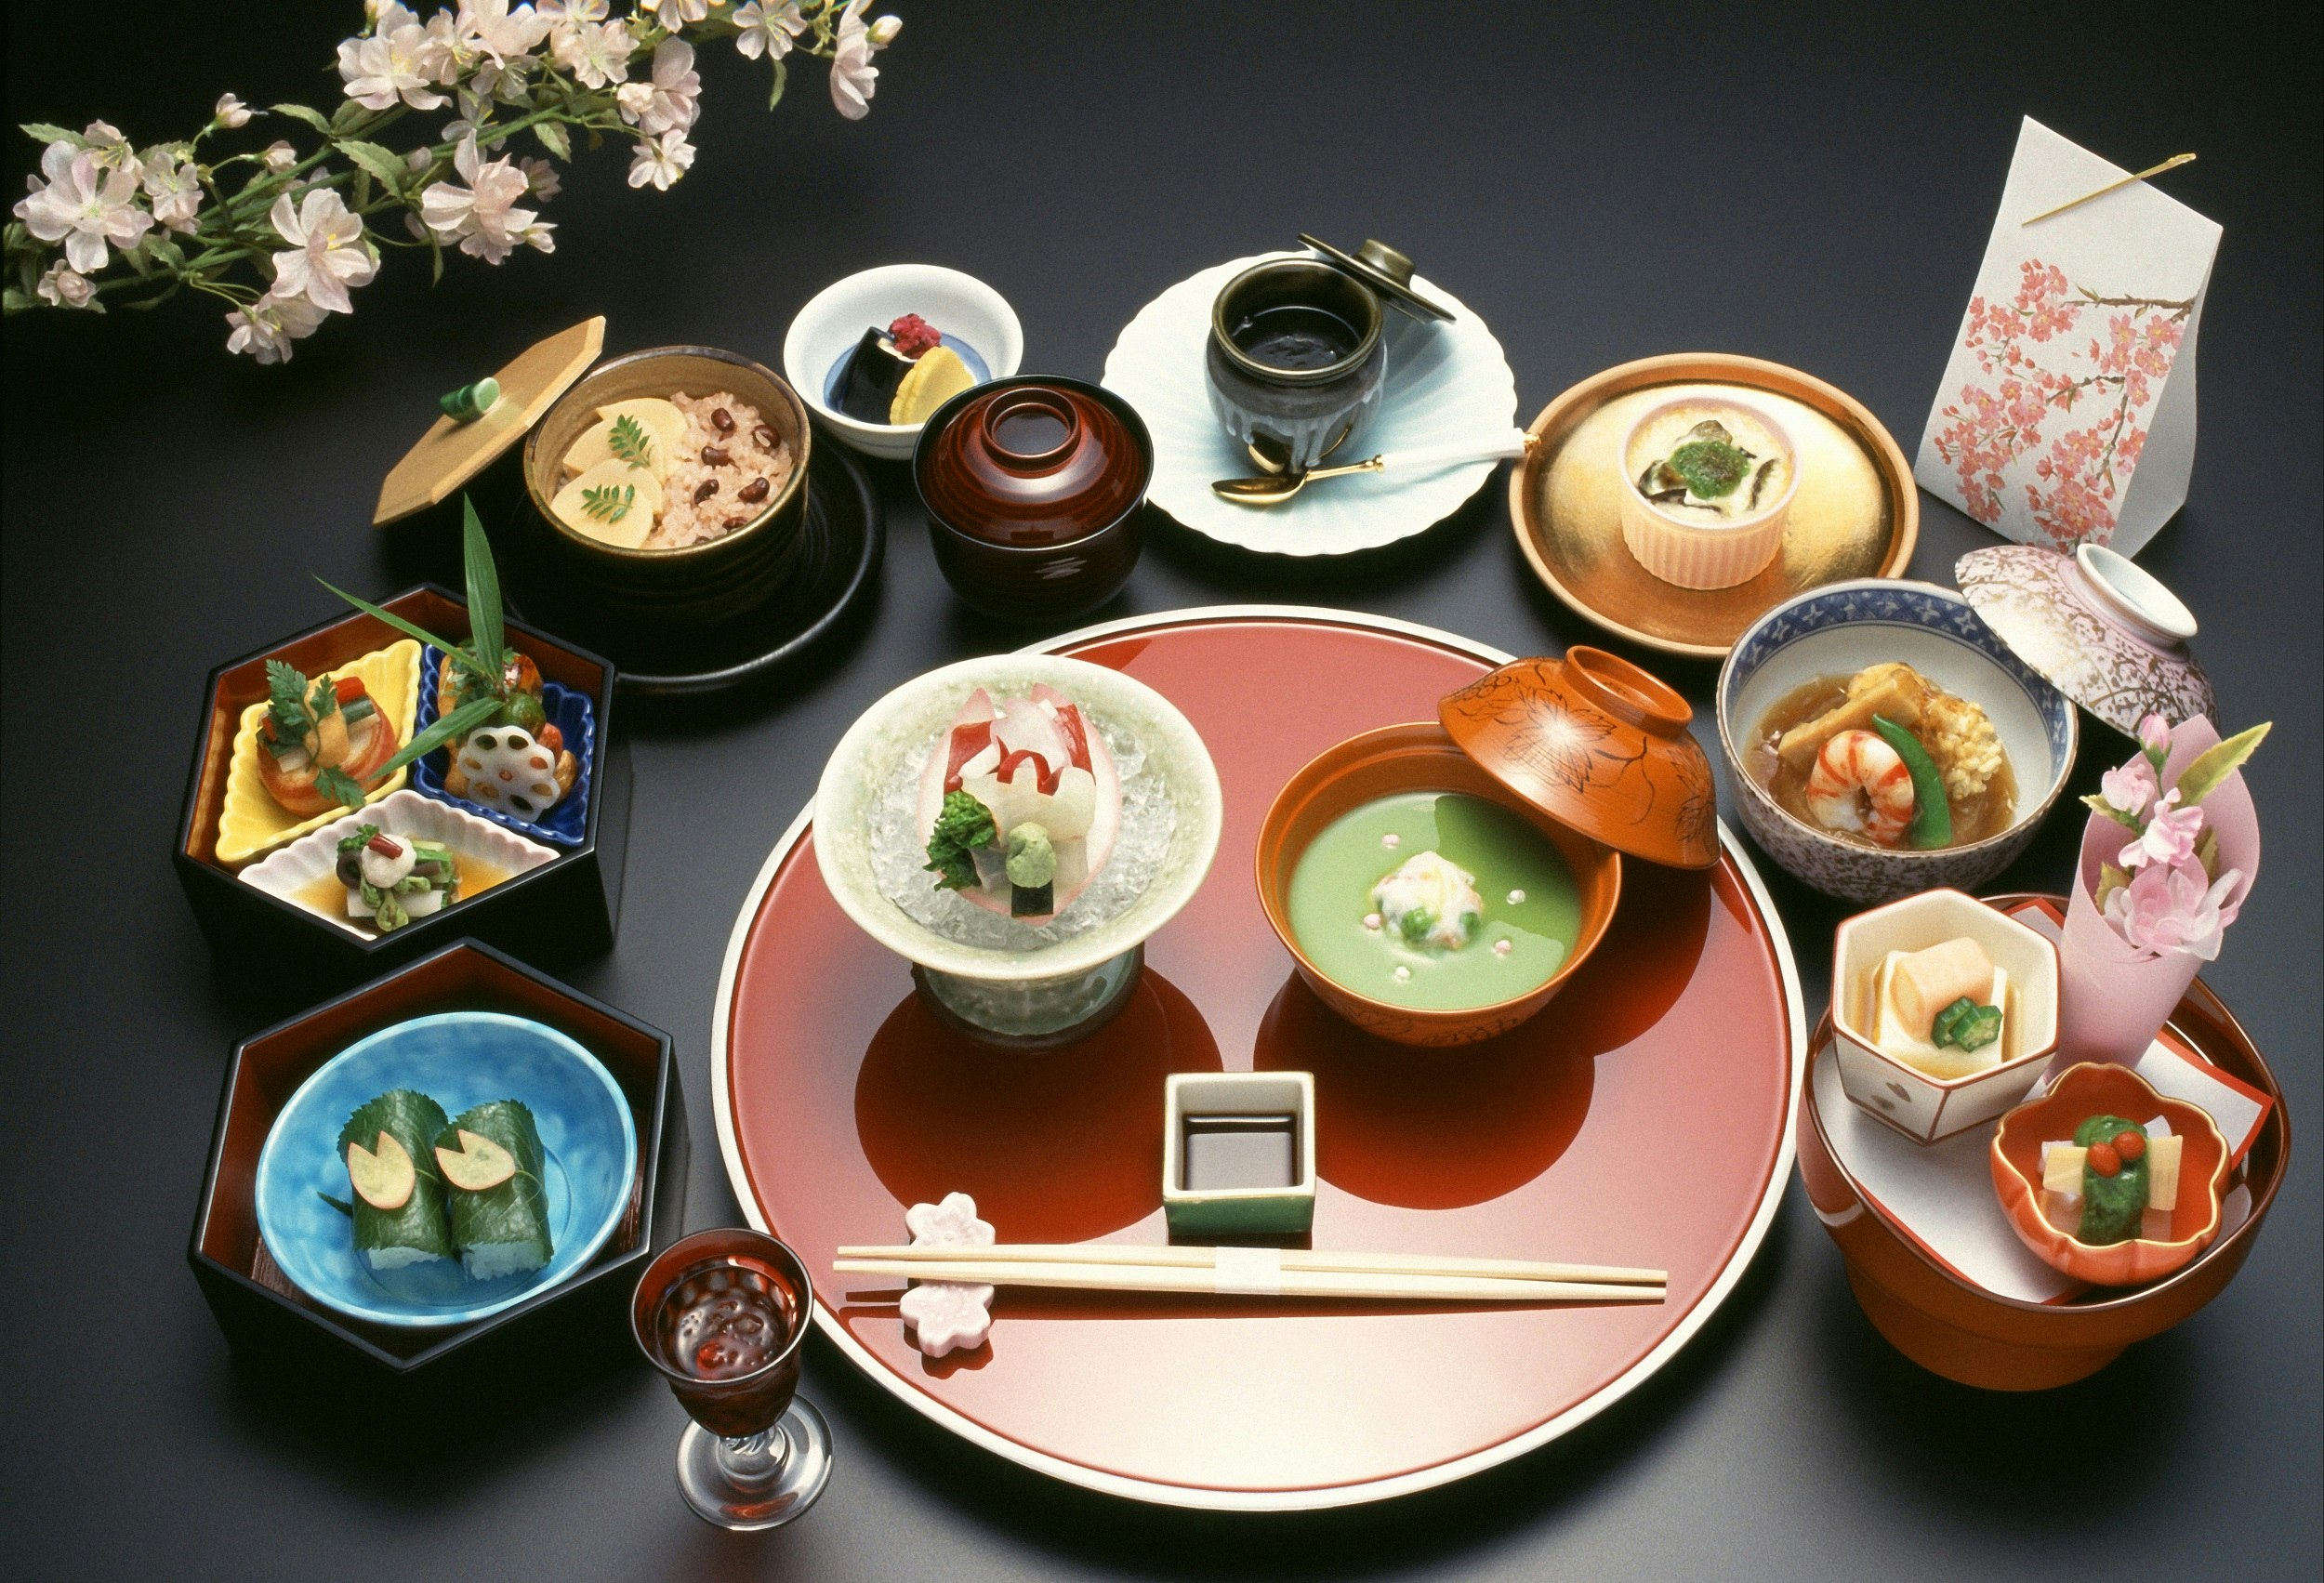 A traditional kaiseki meal sits on a dark table; there are two bowls full of ornate looking dishes atop a red plate, and surrounding it are nine bowls and dishes of various shapes and sizes, each with delicate morsels of food.